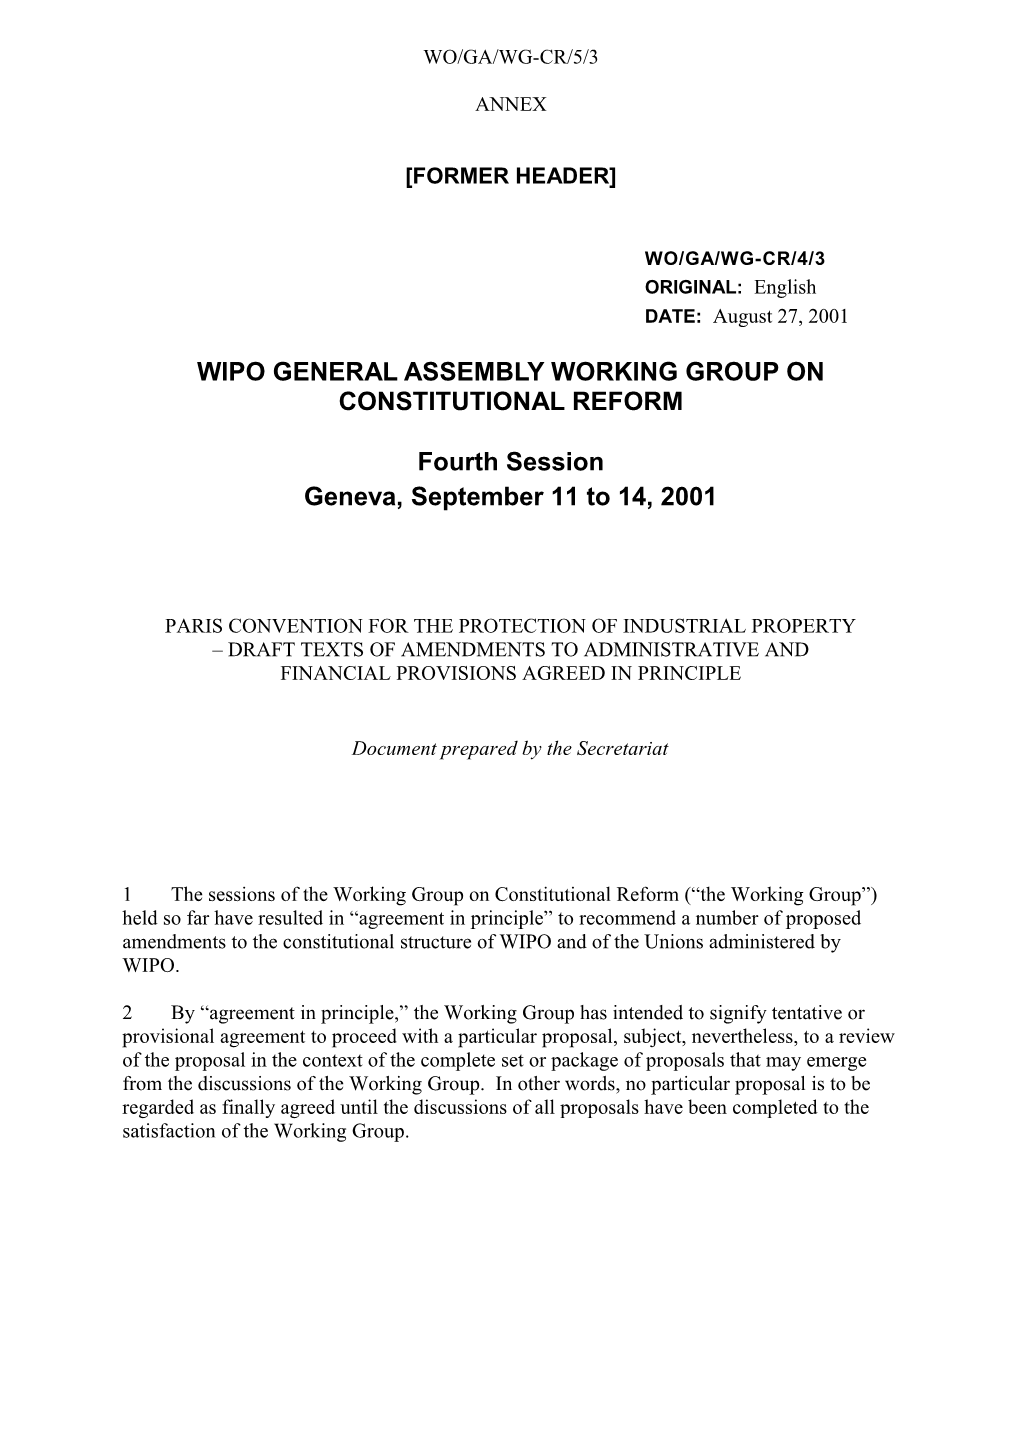 WO/GA/WG-CR/5/3: Paris Convention for the Protection of Industrial Property - Draft Texts